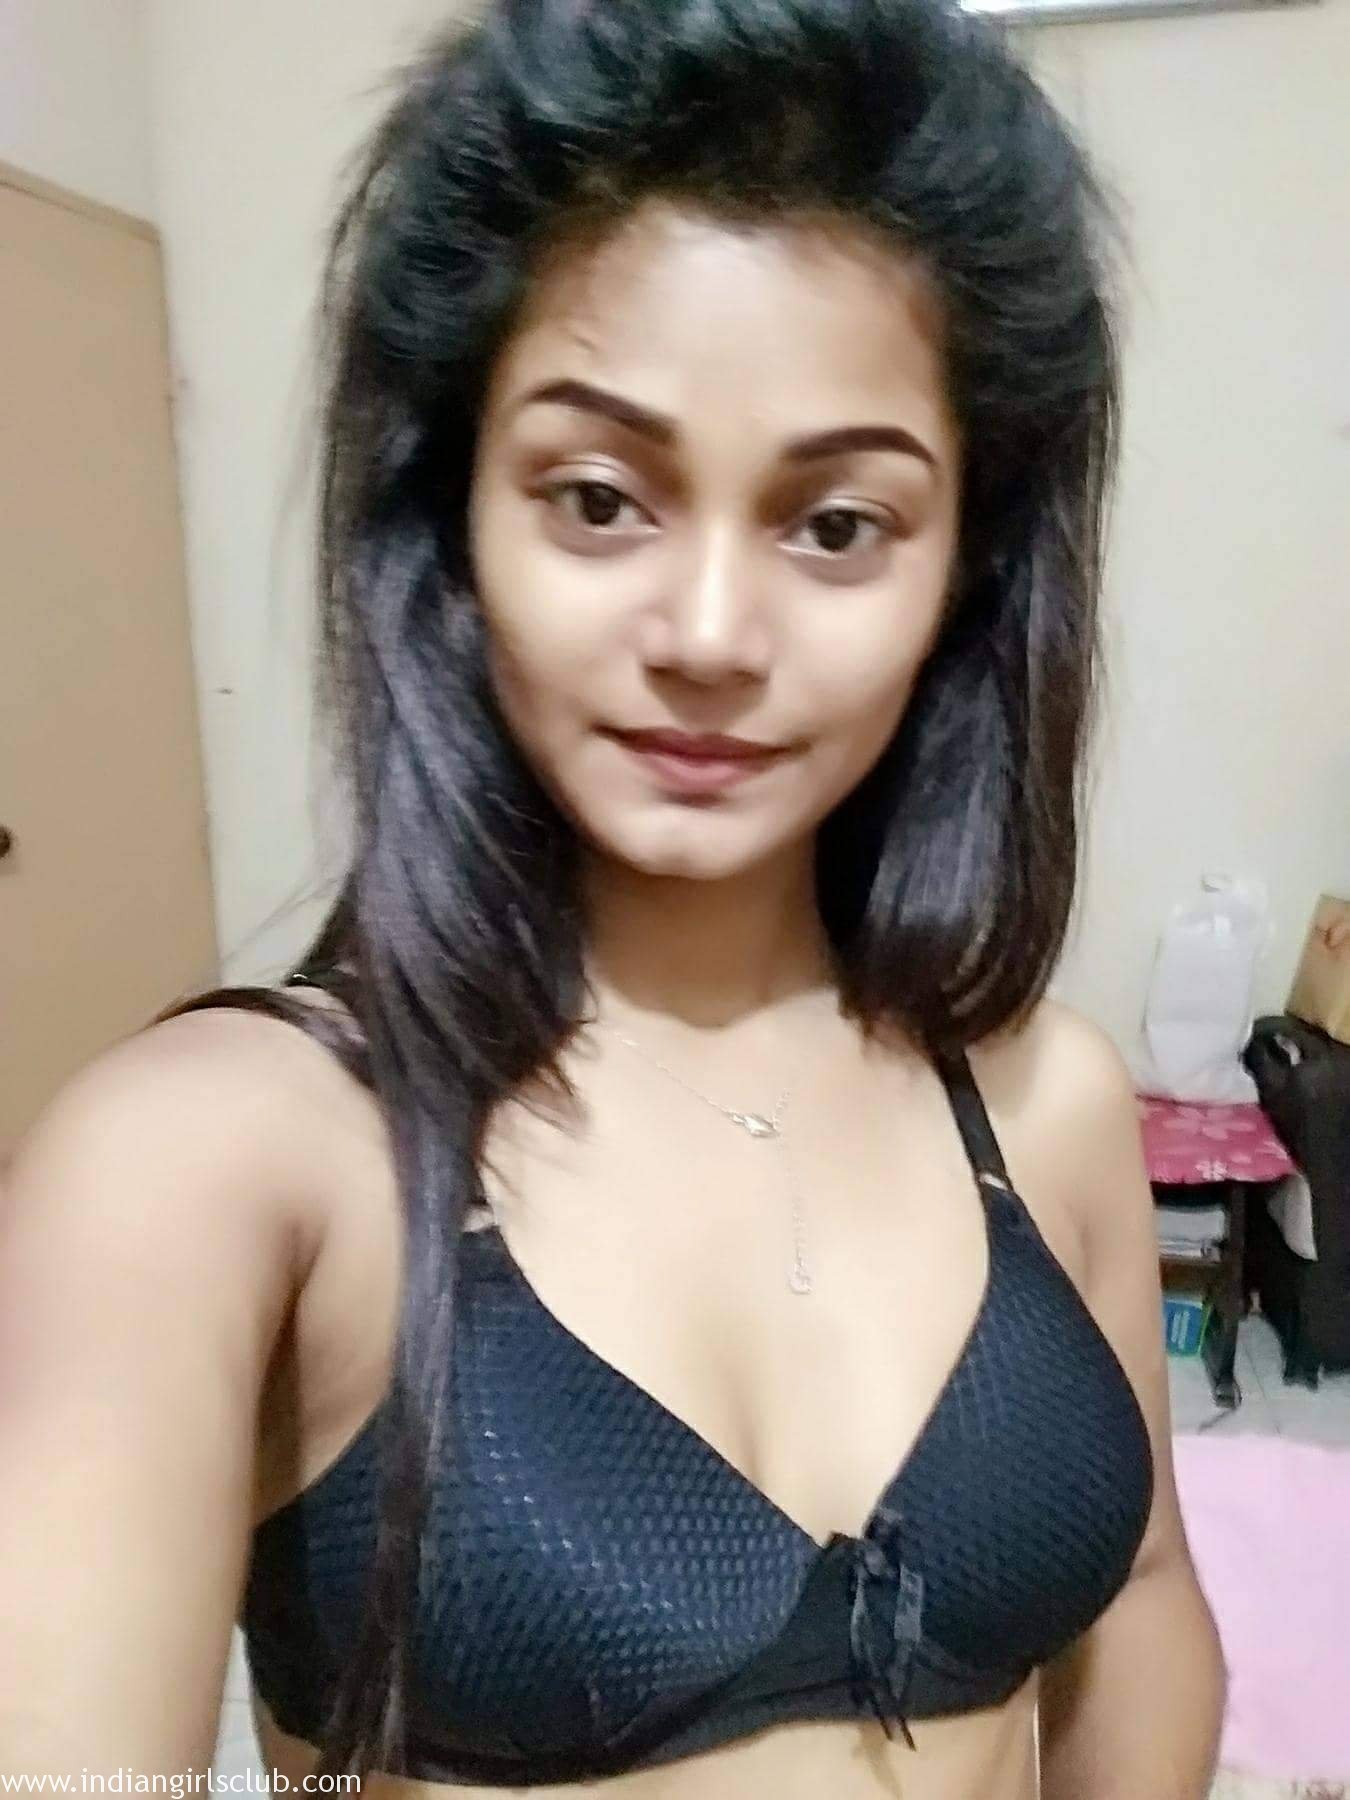 Bra Sex Indian College - juicy_indian_teen_homemade_porn_1 - Indian Girls Club - Nude Indian Girls &  Hot Sexy Indian Babes